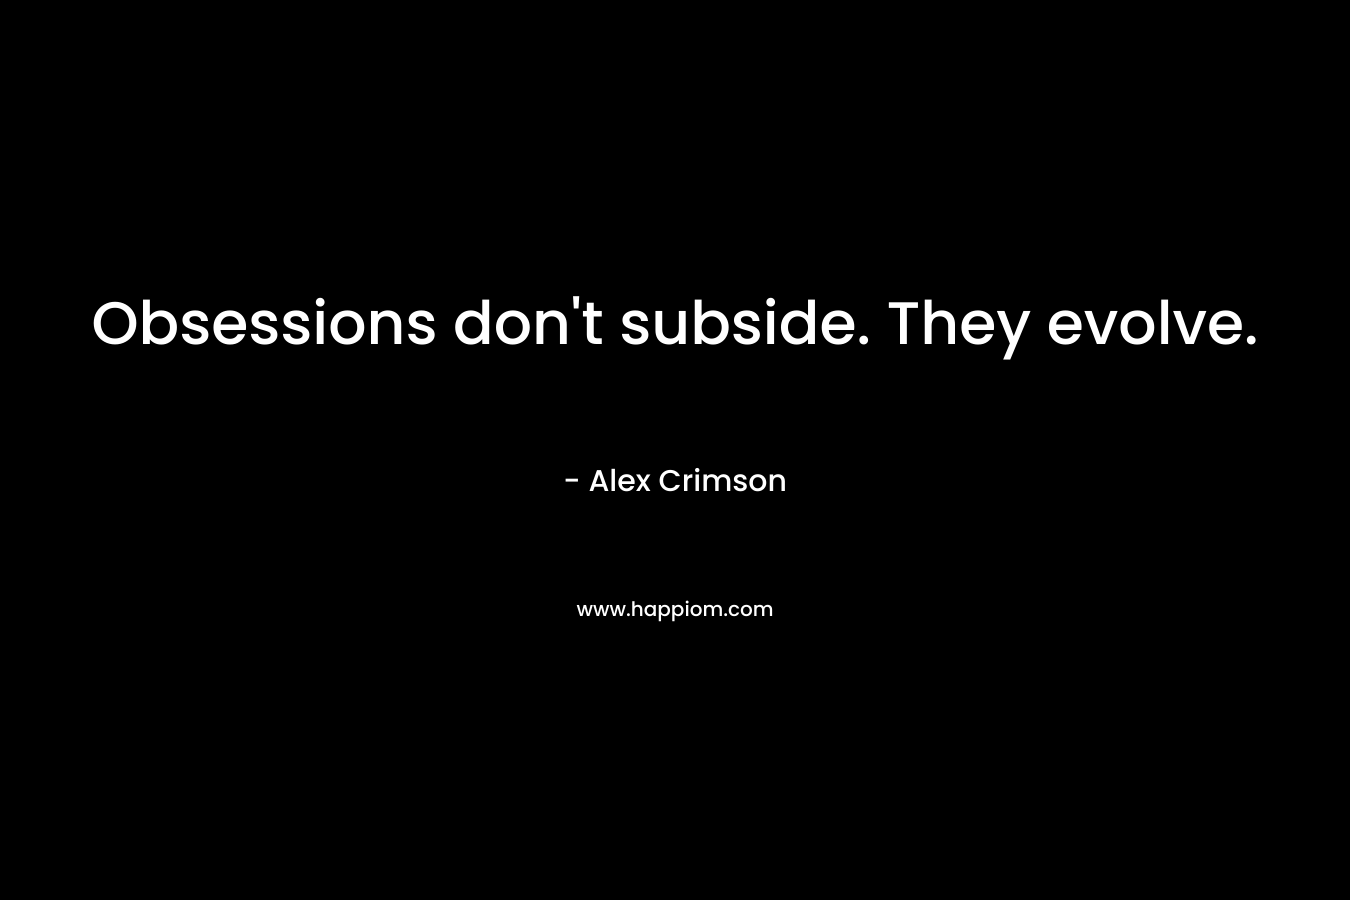 Obsessions don’t subside. They evolve. – Alex Crimson